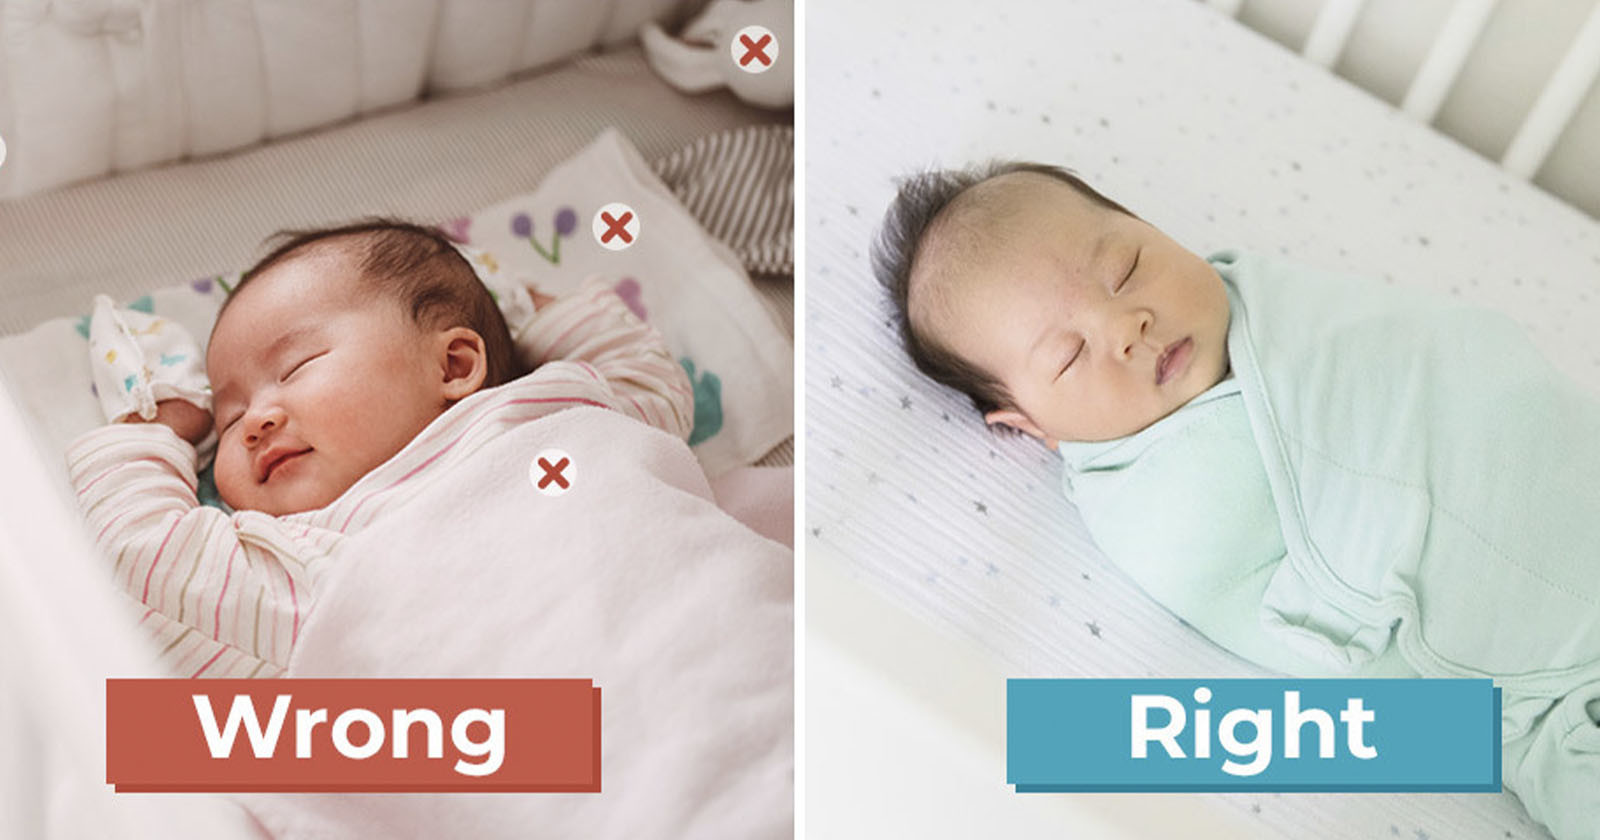 3 Out of 4 Stock Photos of Sleeping Babies Show Unsafe Spaces, Study Finds